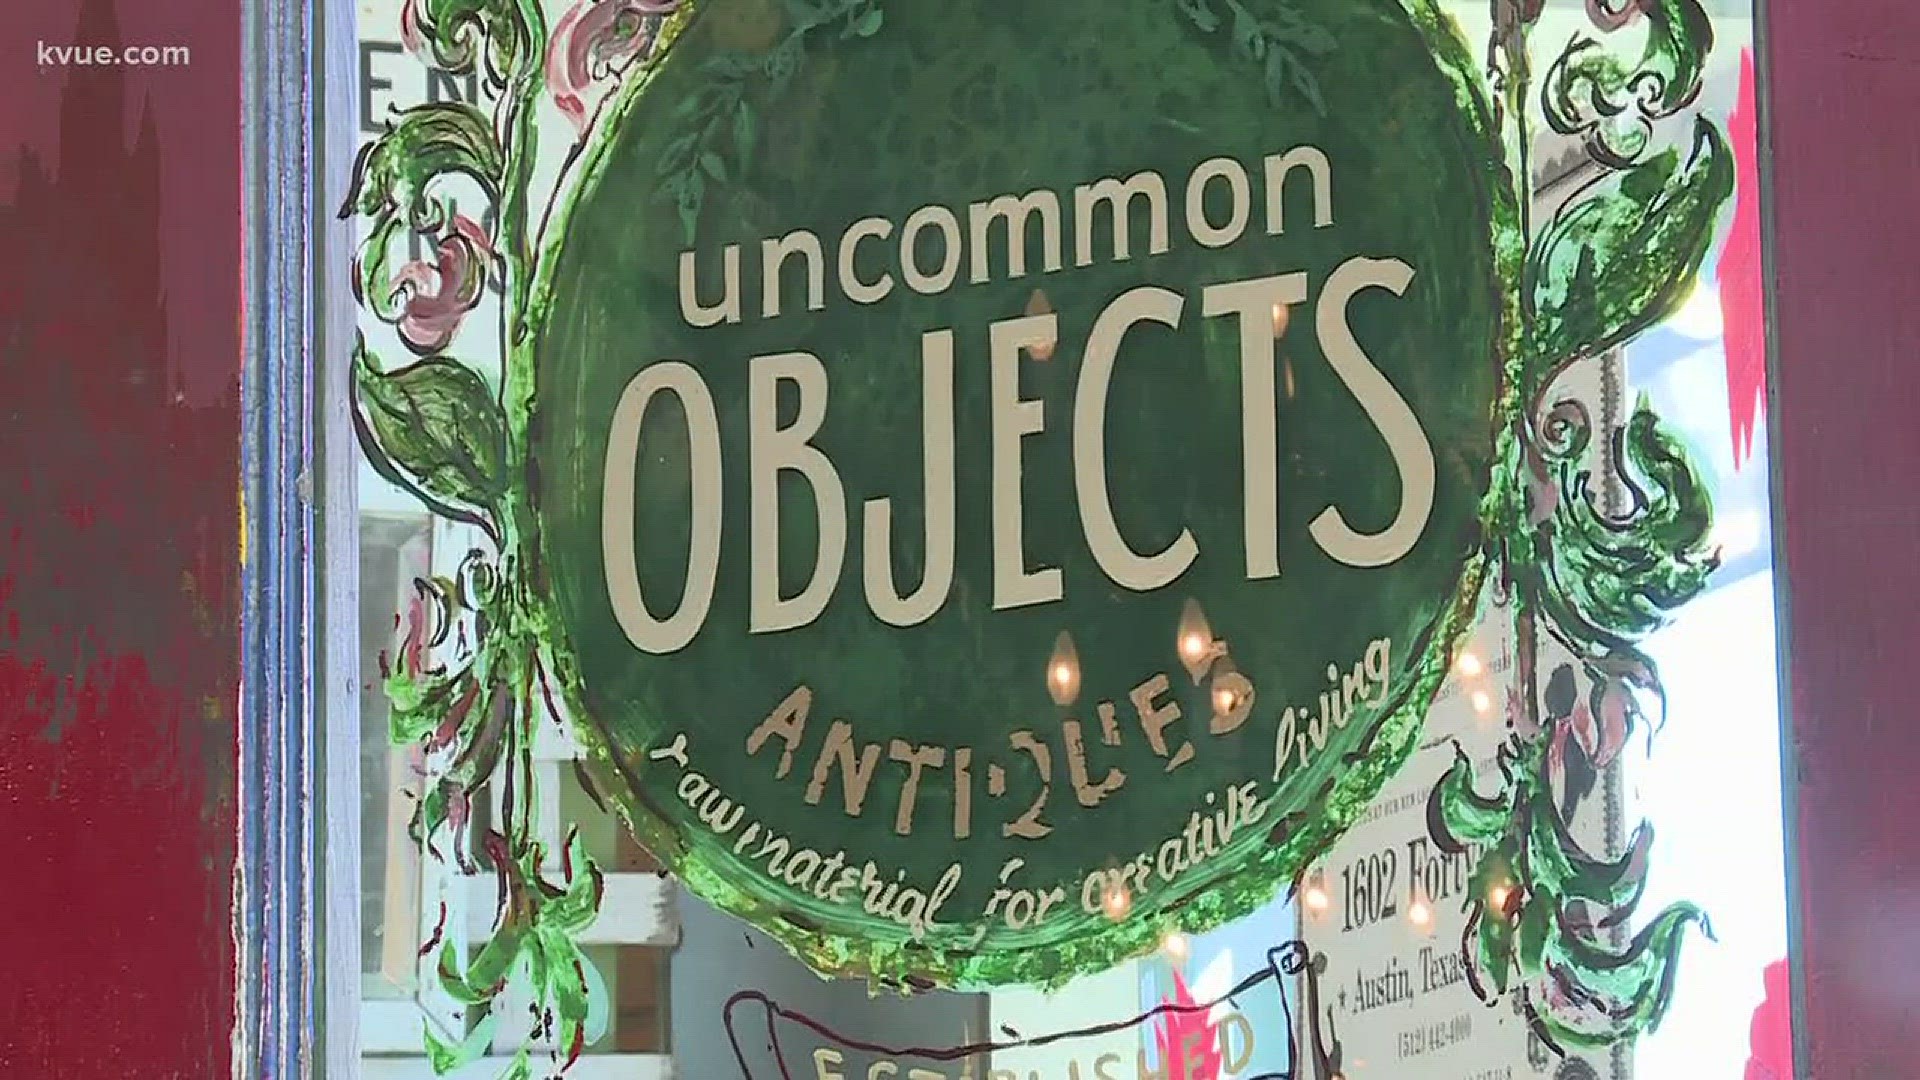 It's the end of an era, the authentic Austin shop, "Uncommon Objects",  is closing on South Congress.